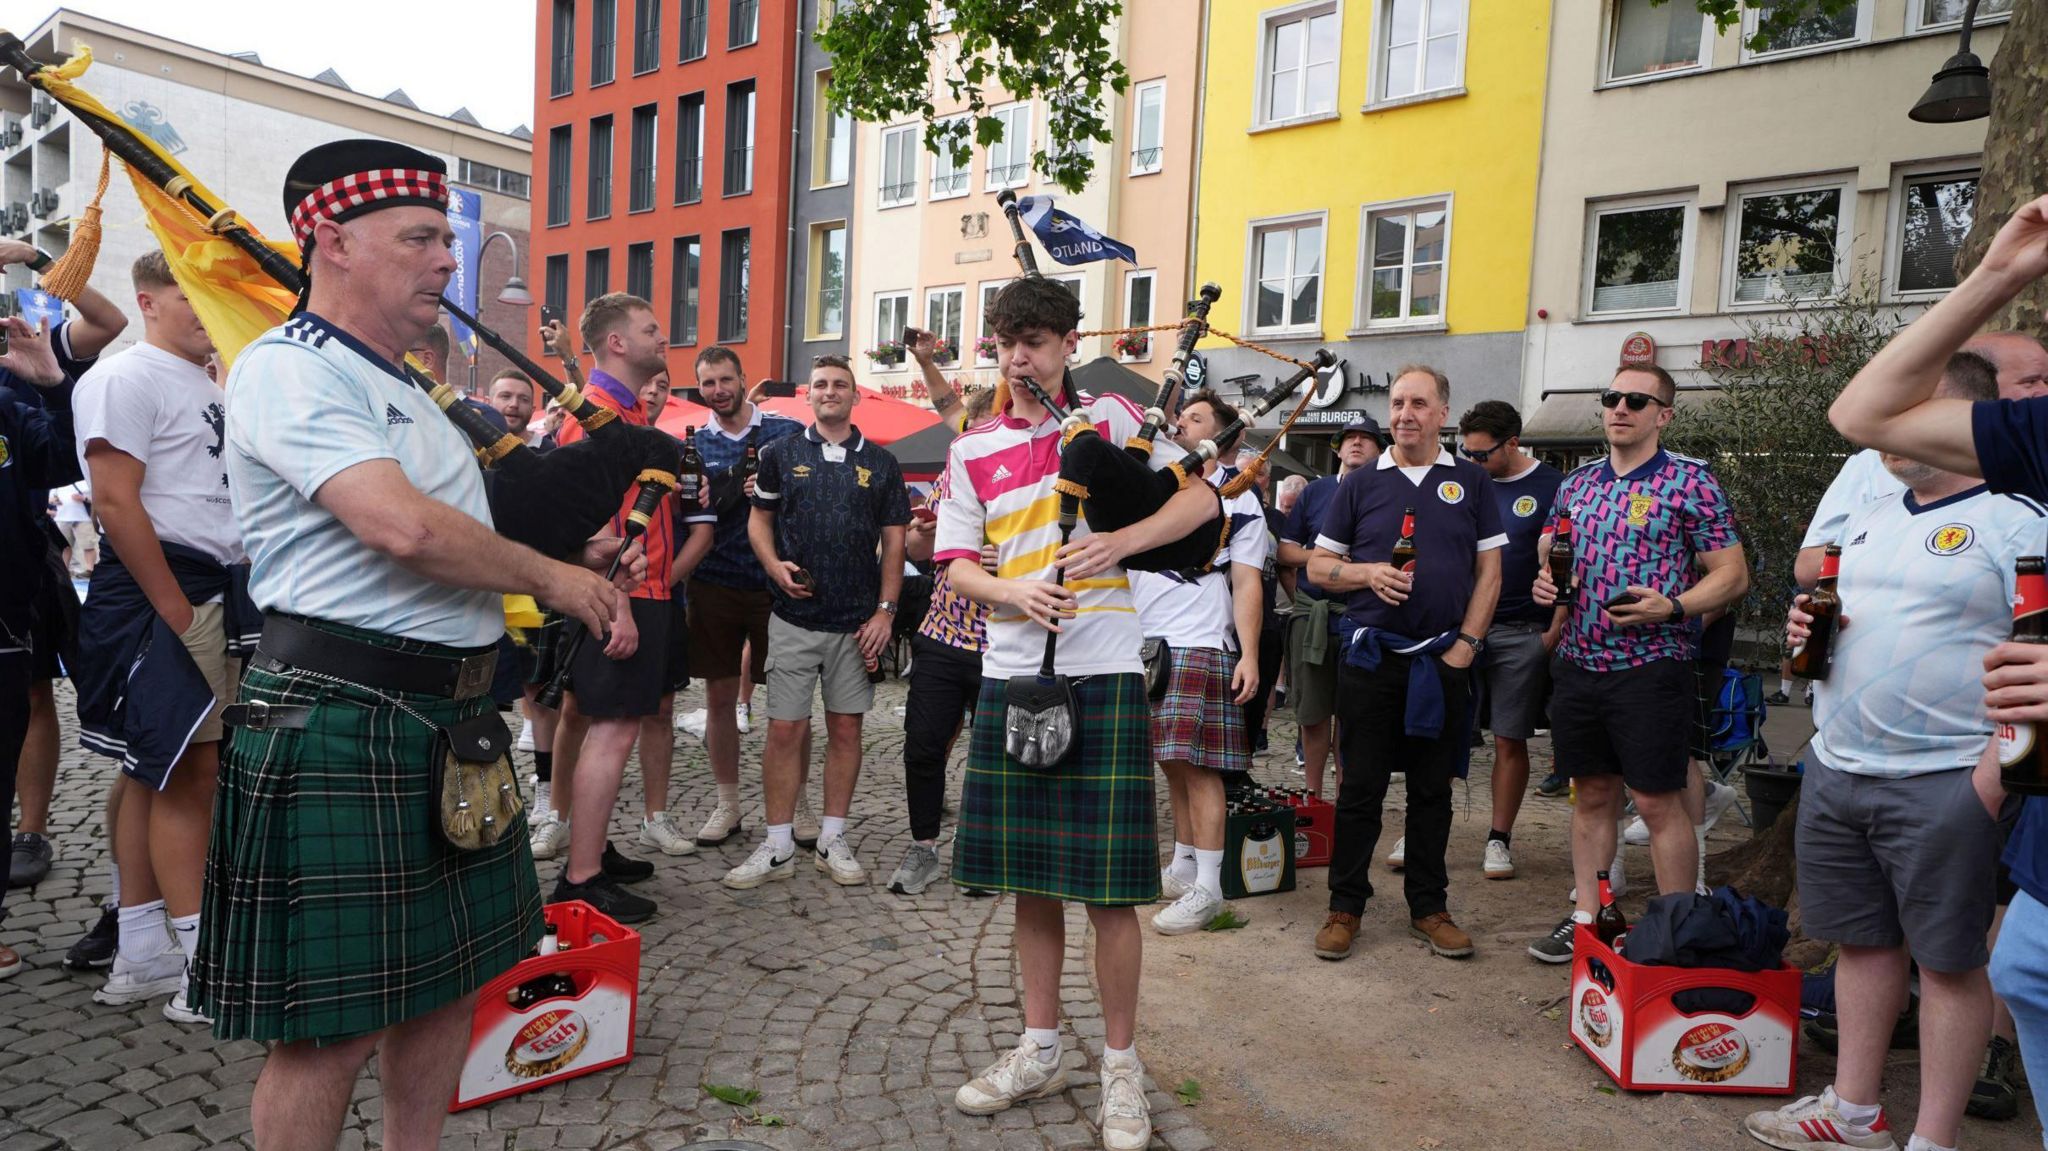 Scotland fans playing the bagpipes in Cologne during Euro 2024